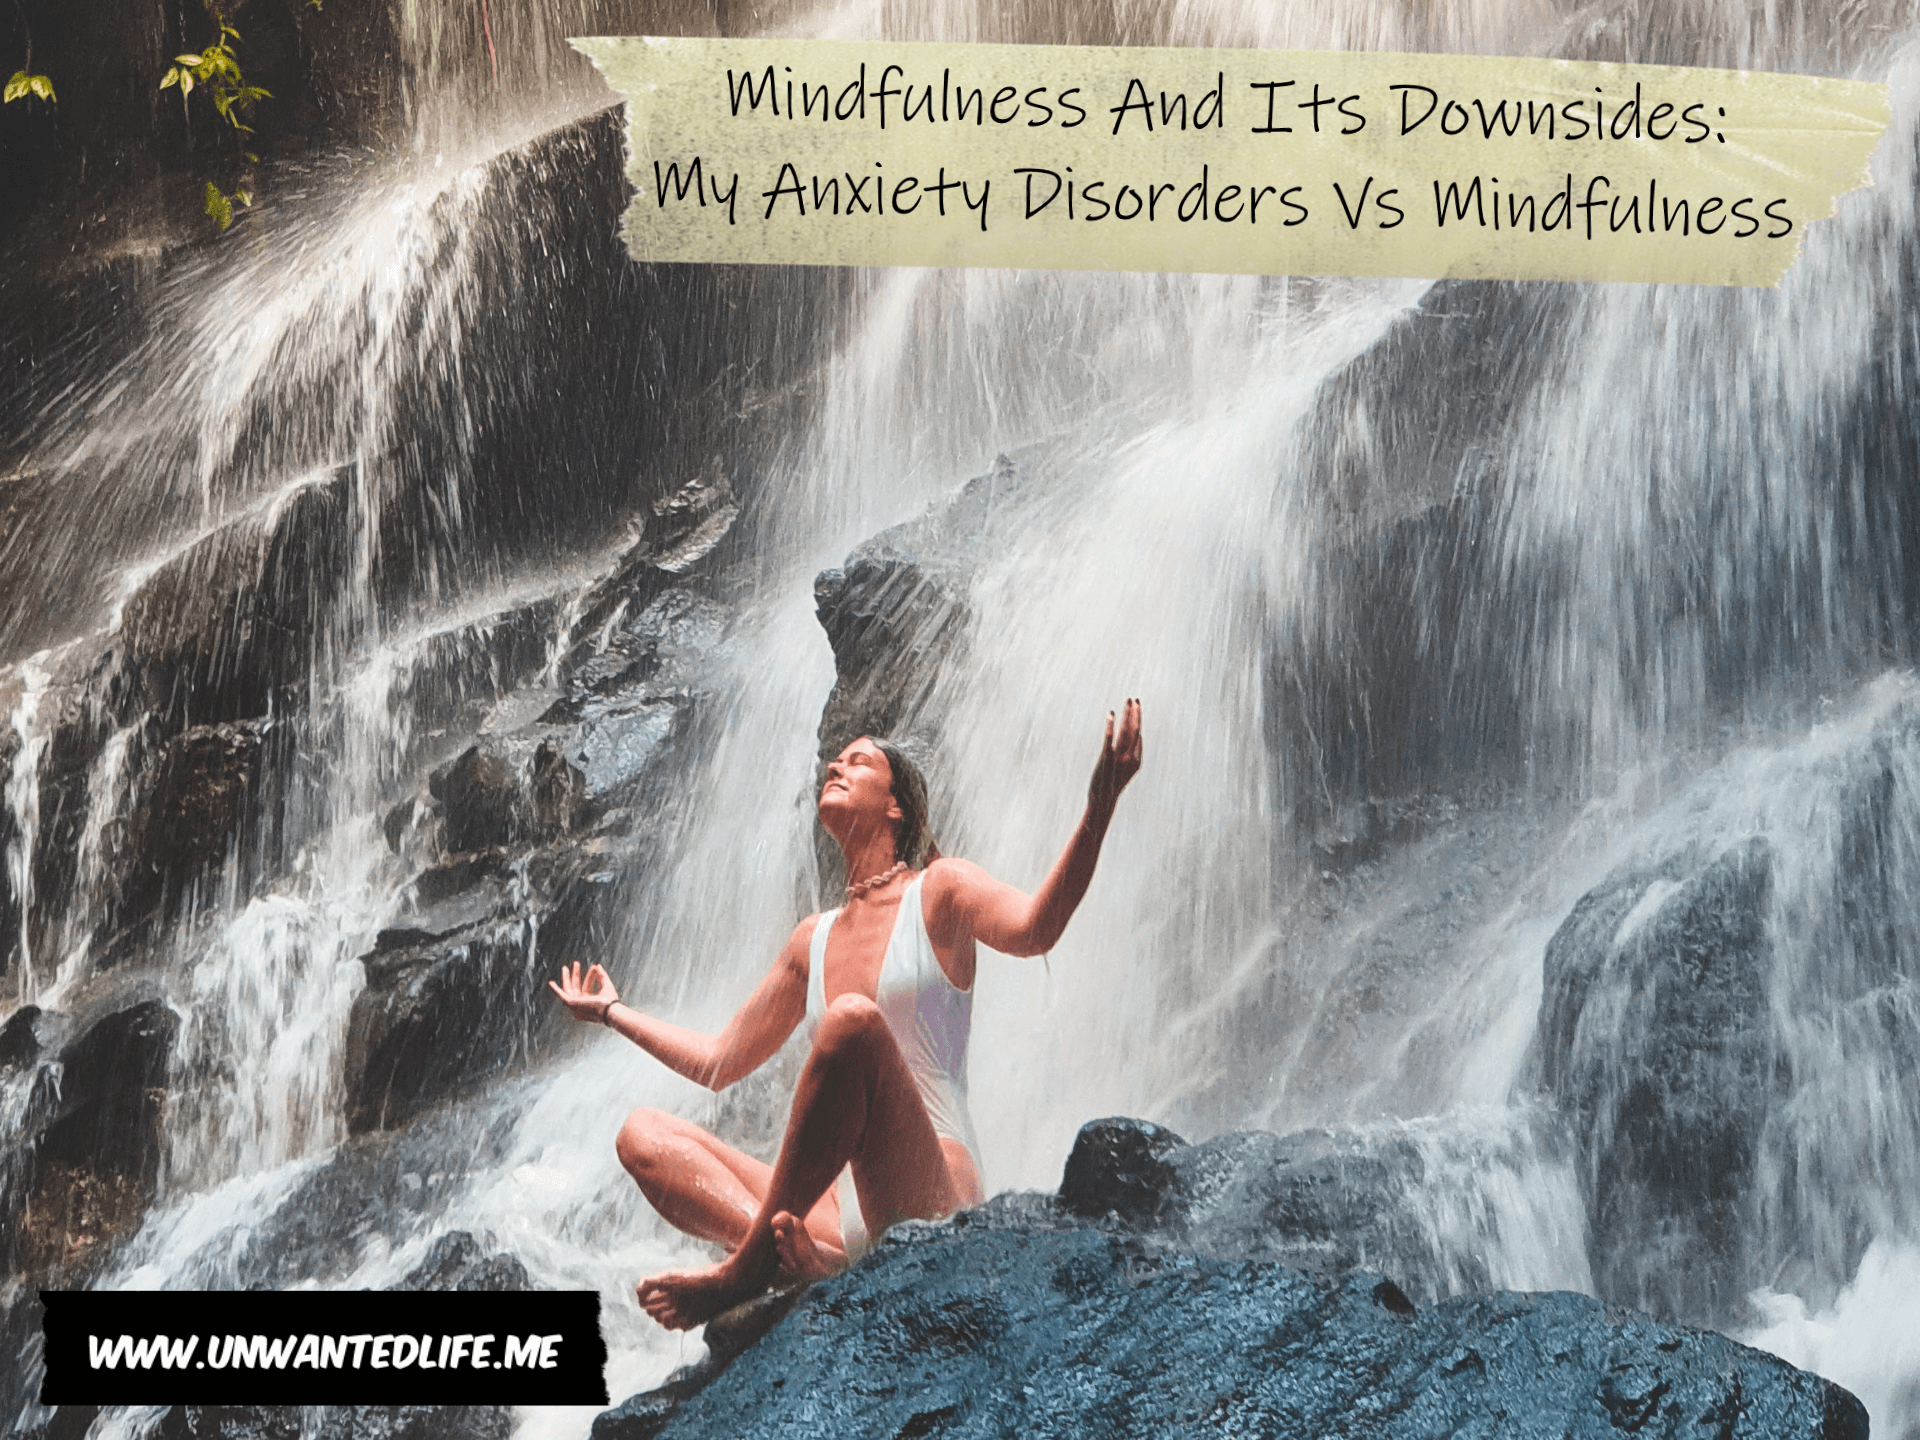 A woman sitting near a waterfall meditating with the title of the article (Mindfulness And Its Downsides: My Anxiety Disorders Vs Mindfulness) above her